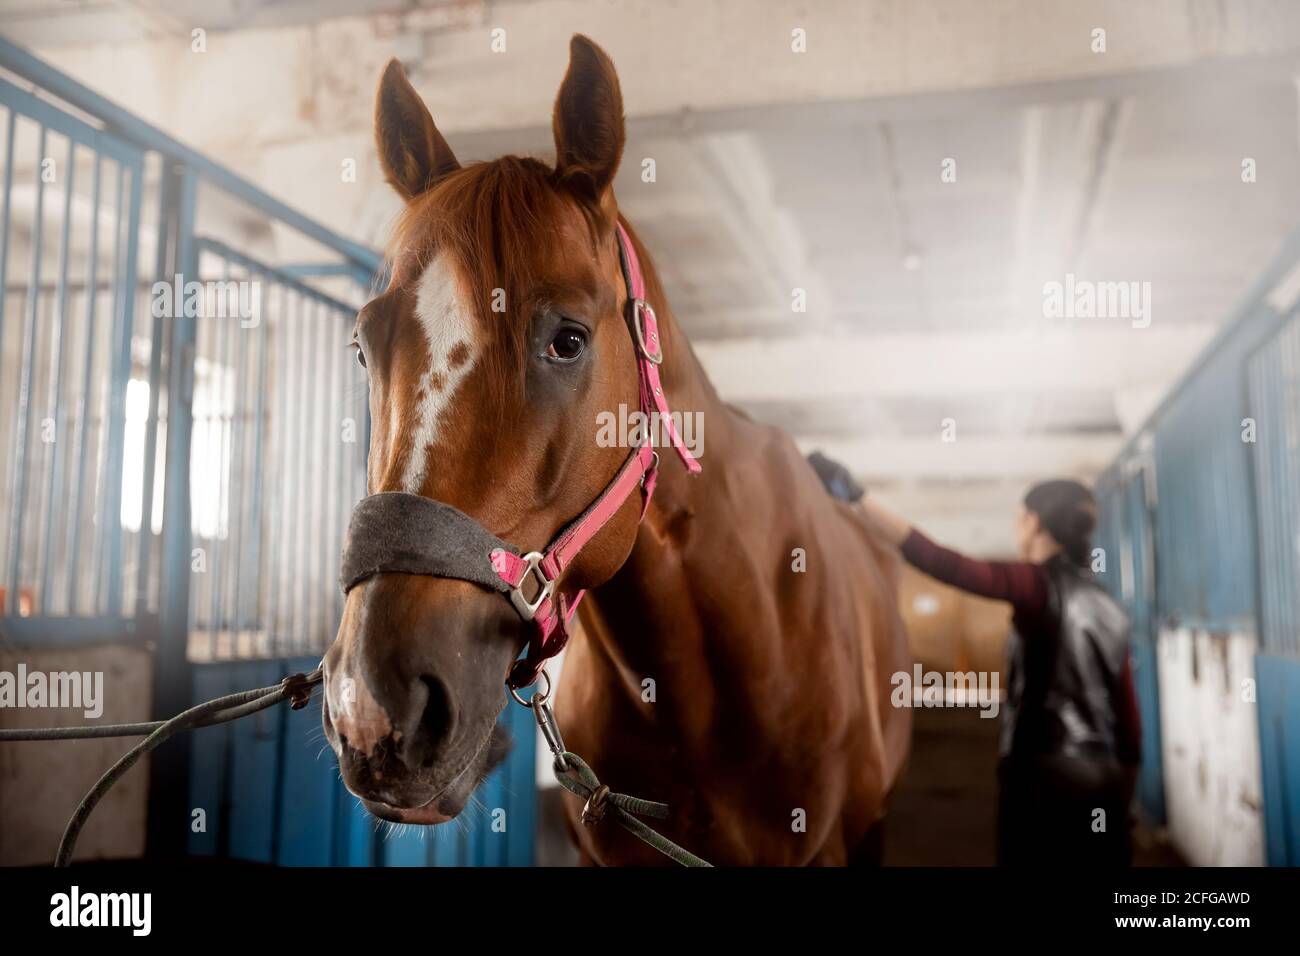 Woman grooming brushes horse out and prepares after ride in stall Stock Photo